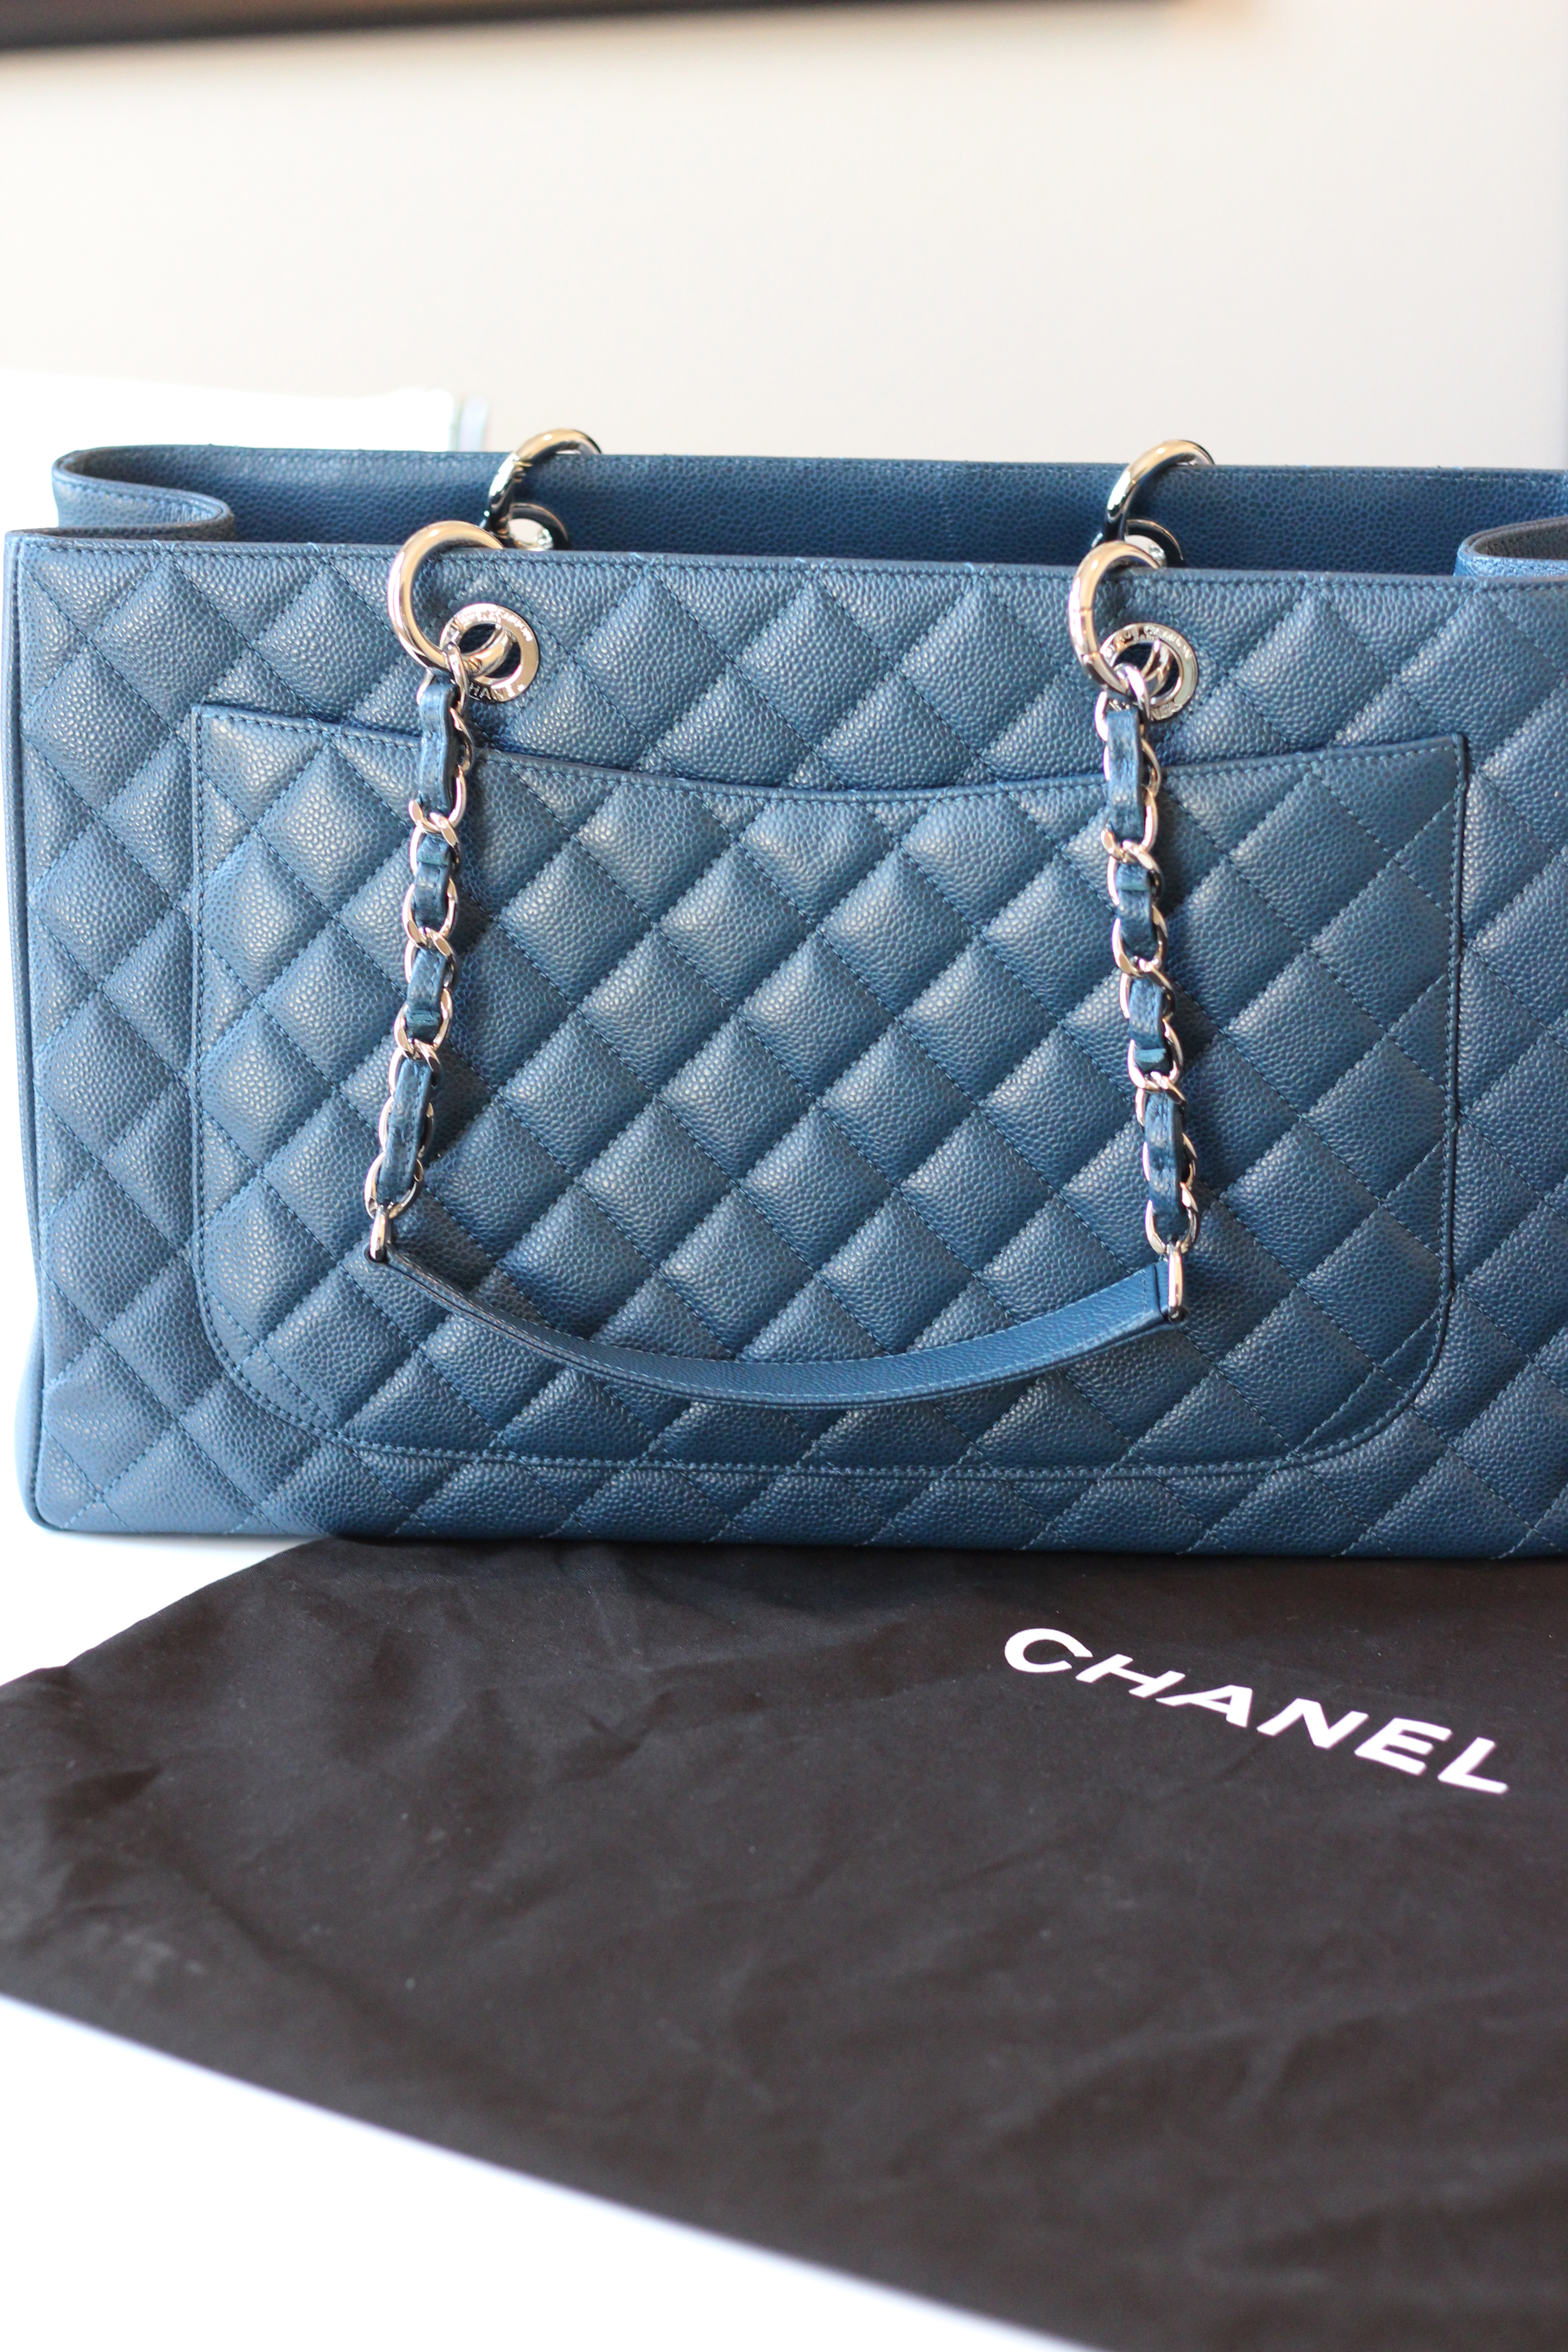 Chanel GST and GST XL or maxi size comparison , review and witch one to buy  